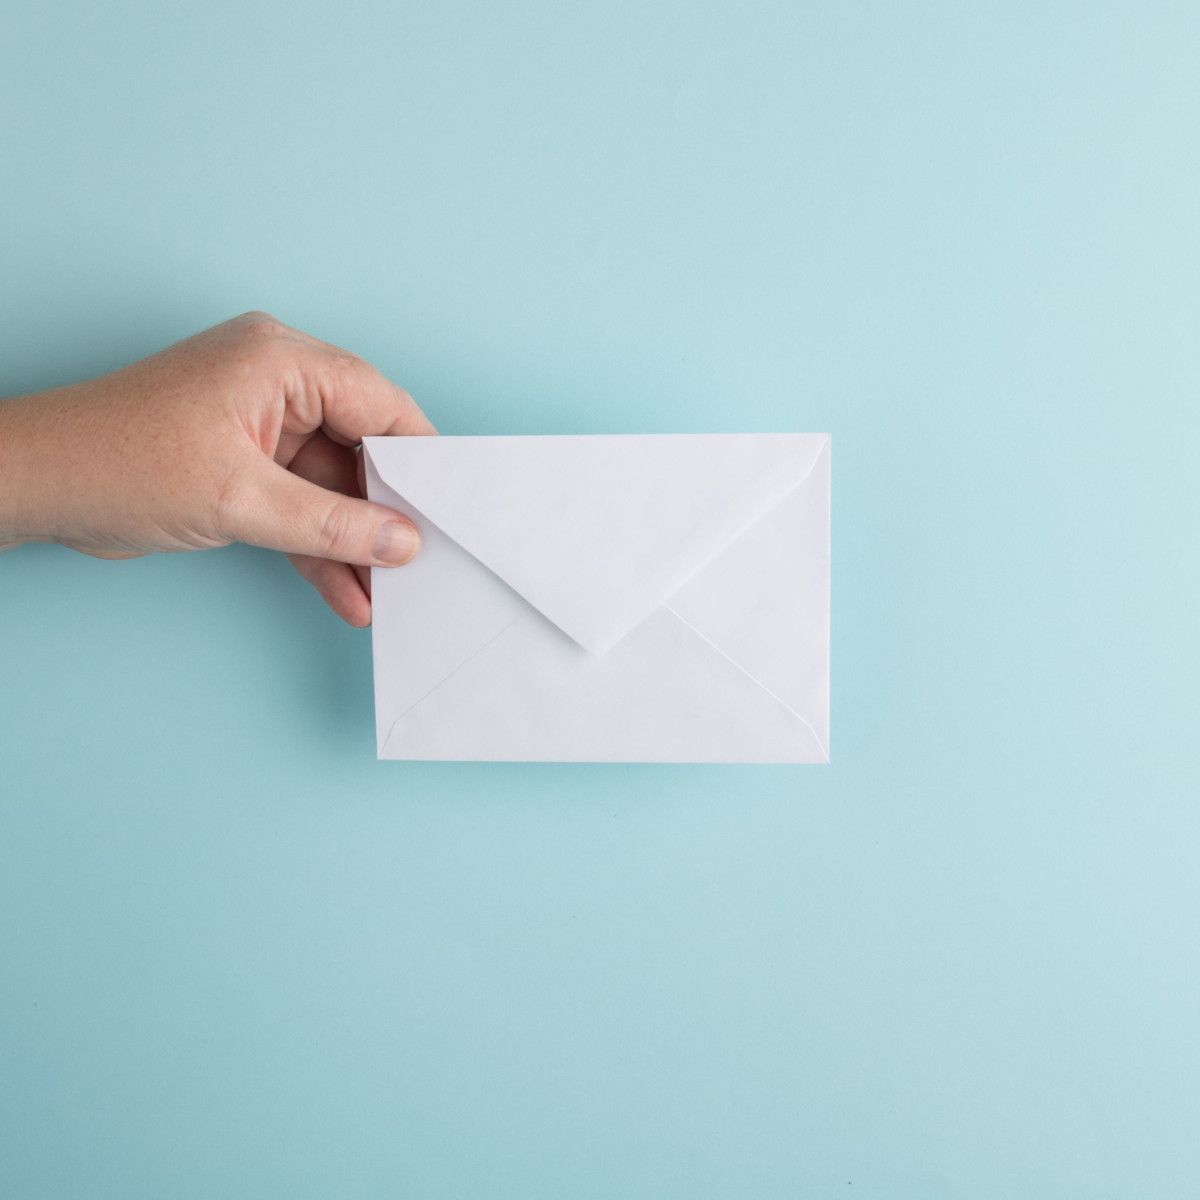 A hand holding an envelope